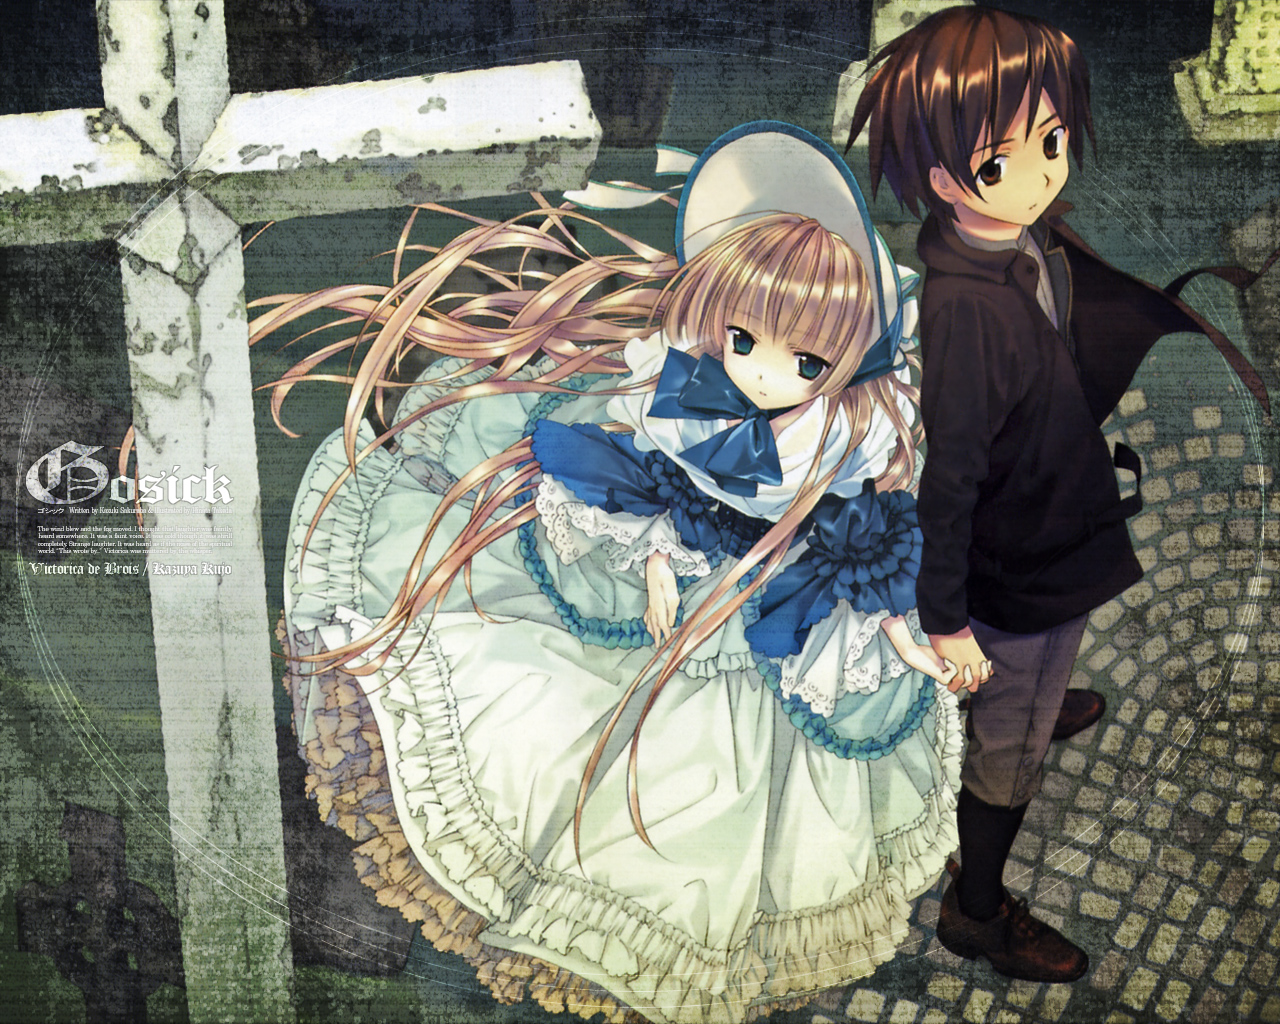  ... gosick had a couple things going for it already and i really did